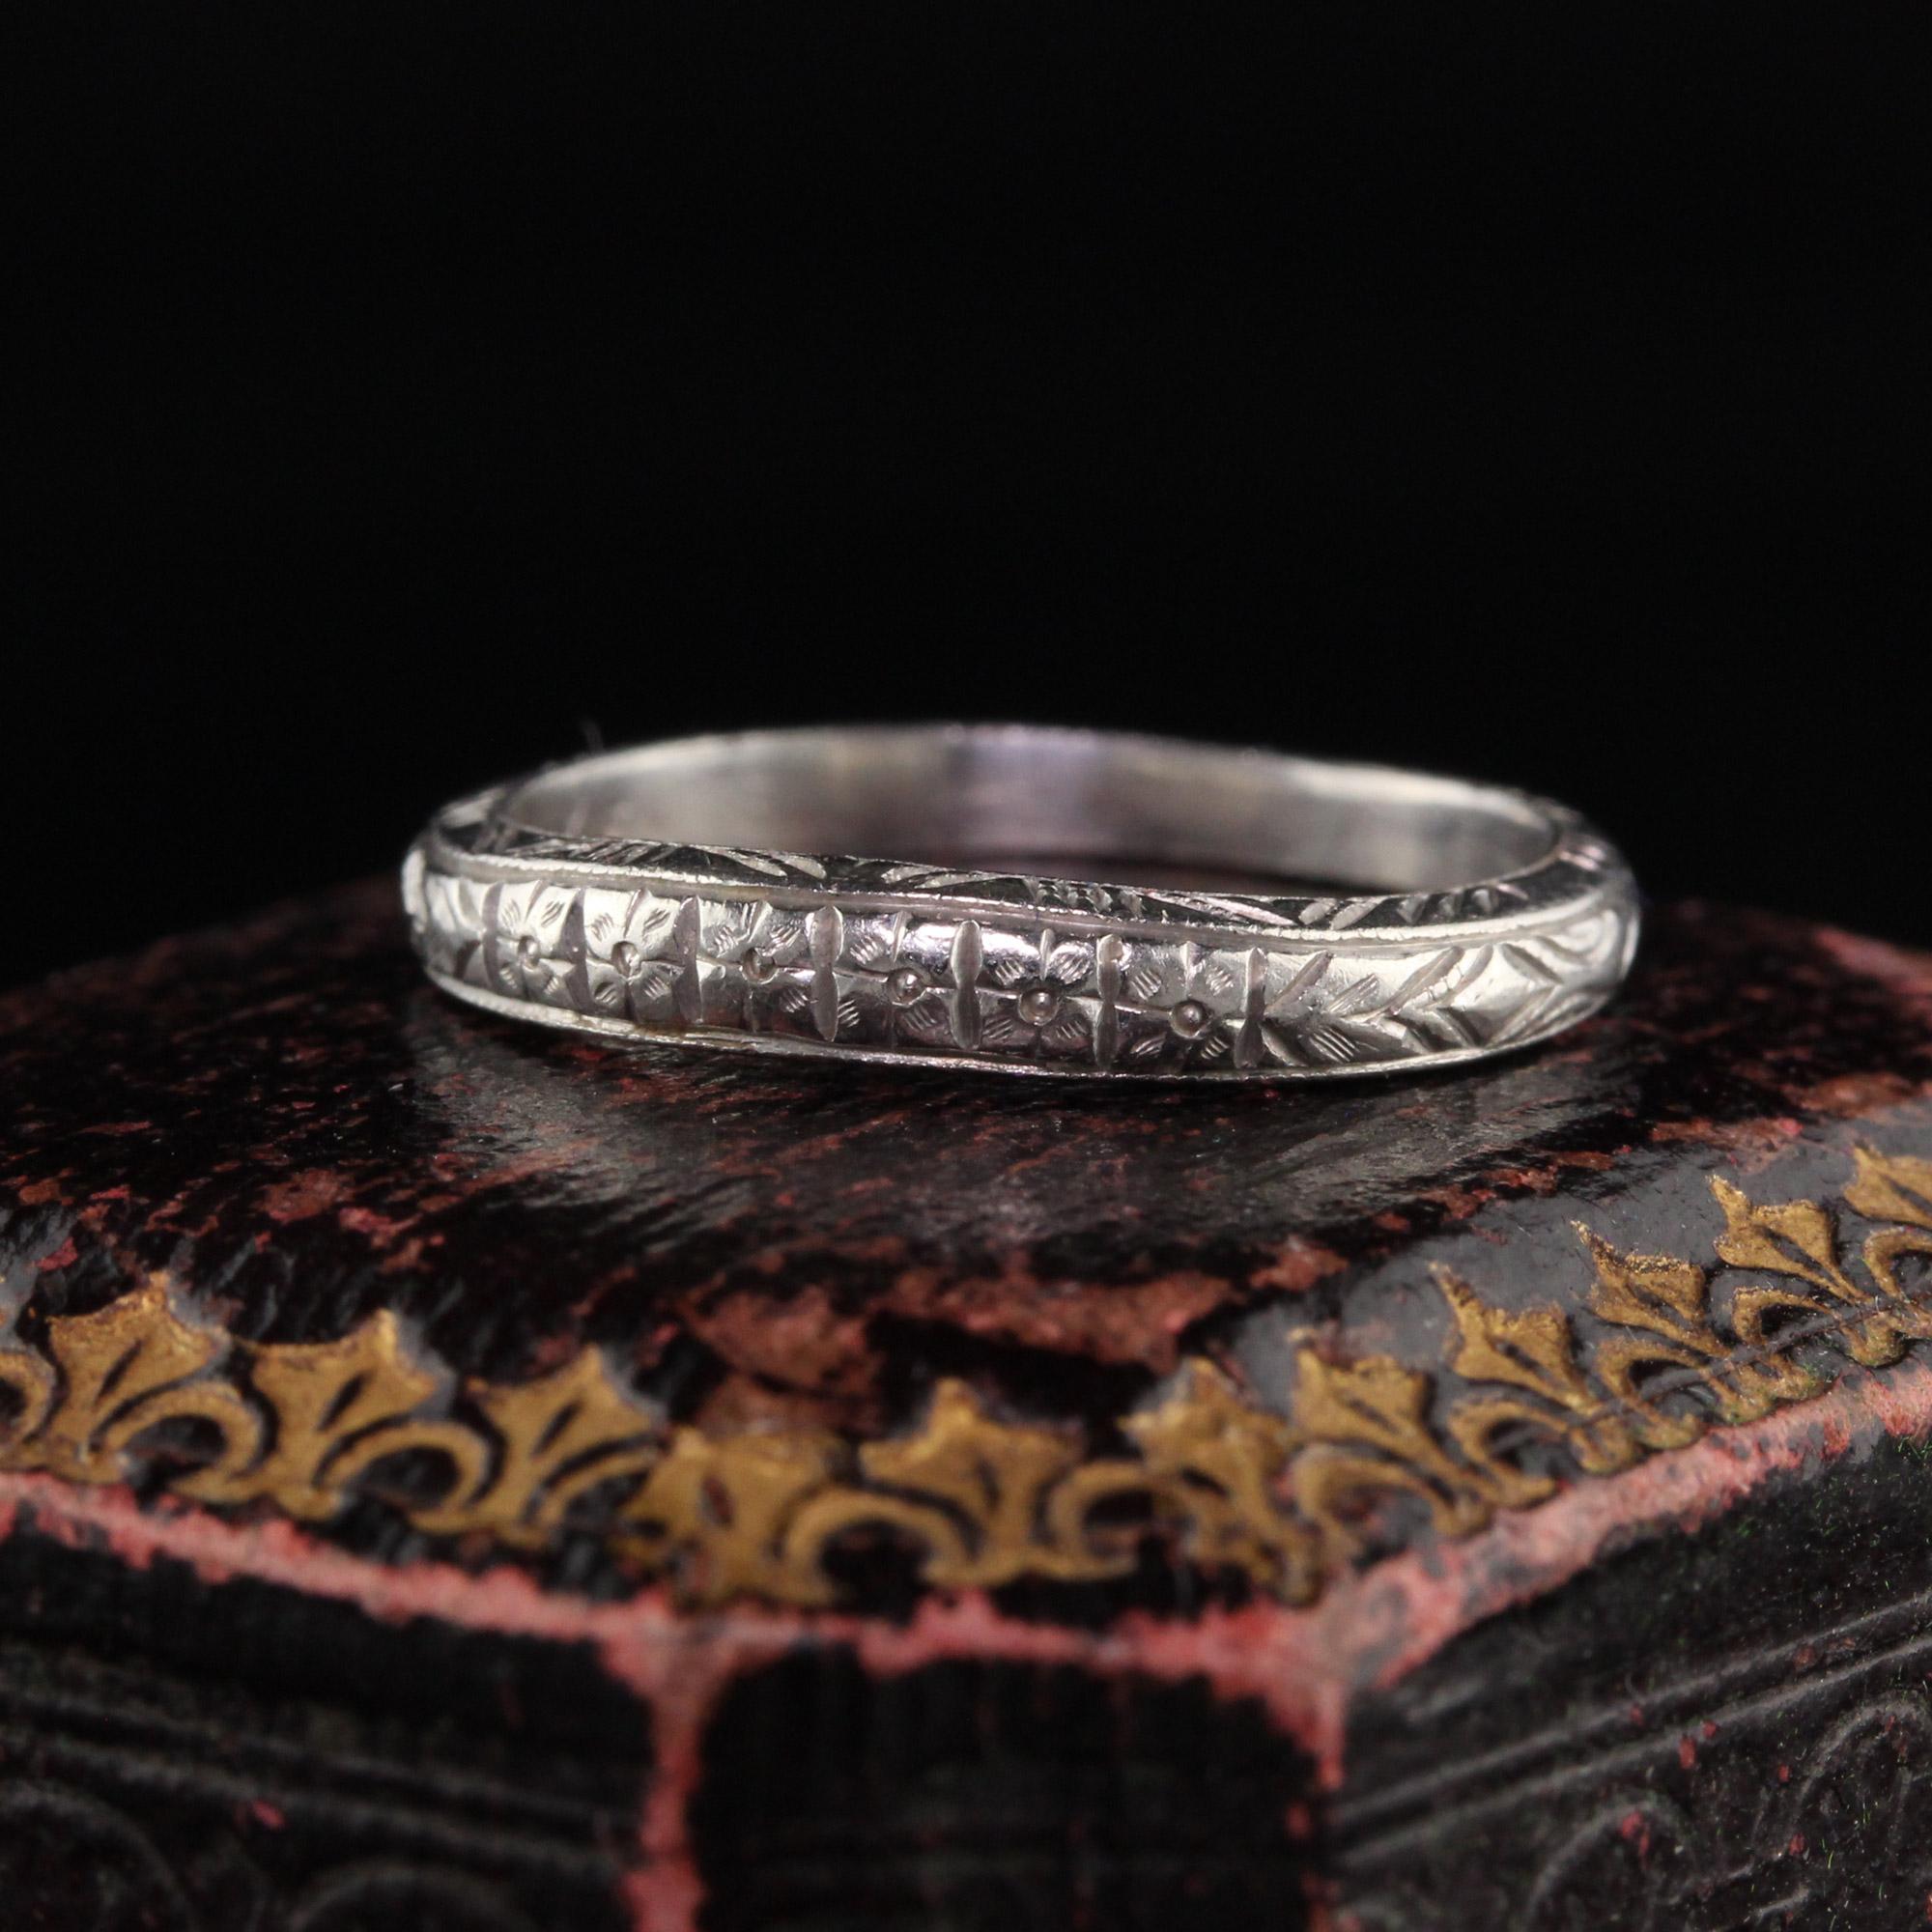 Beautiful Antique Art Deco Platinum Engraved Curved Wedding Band. This gorgeous Art Deco wedding band has engravings going around the entire ring. The top of the band has a slight curve to it.

Item #R1169

Metal: Platinum

Weight: 3.1 Grams

Size: